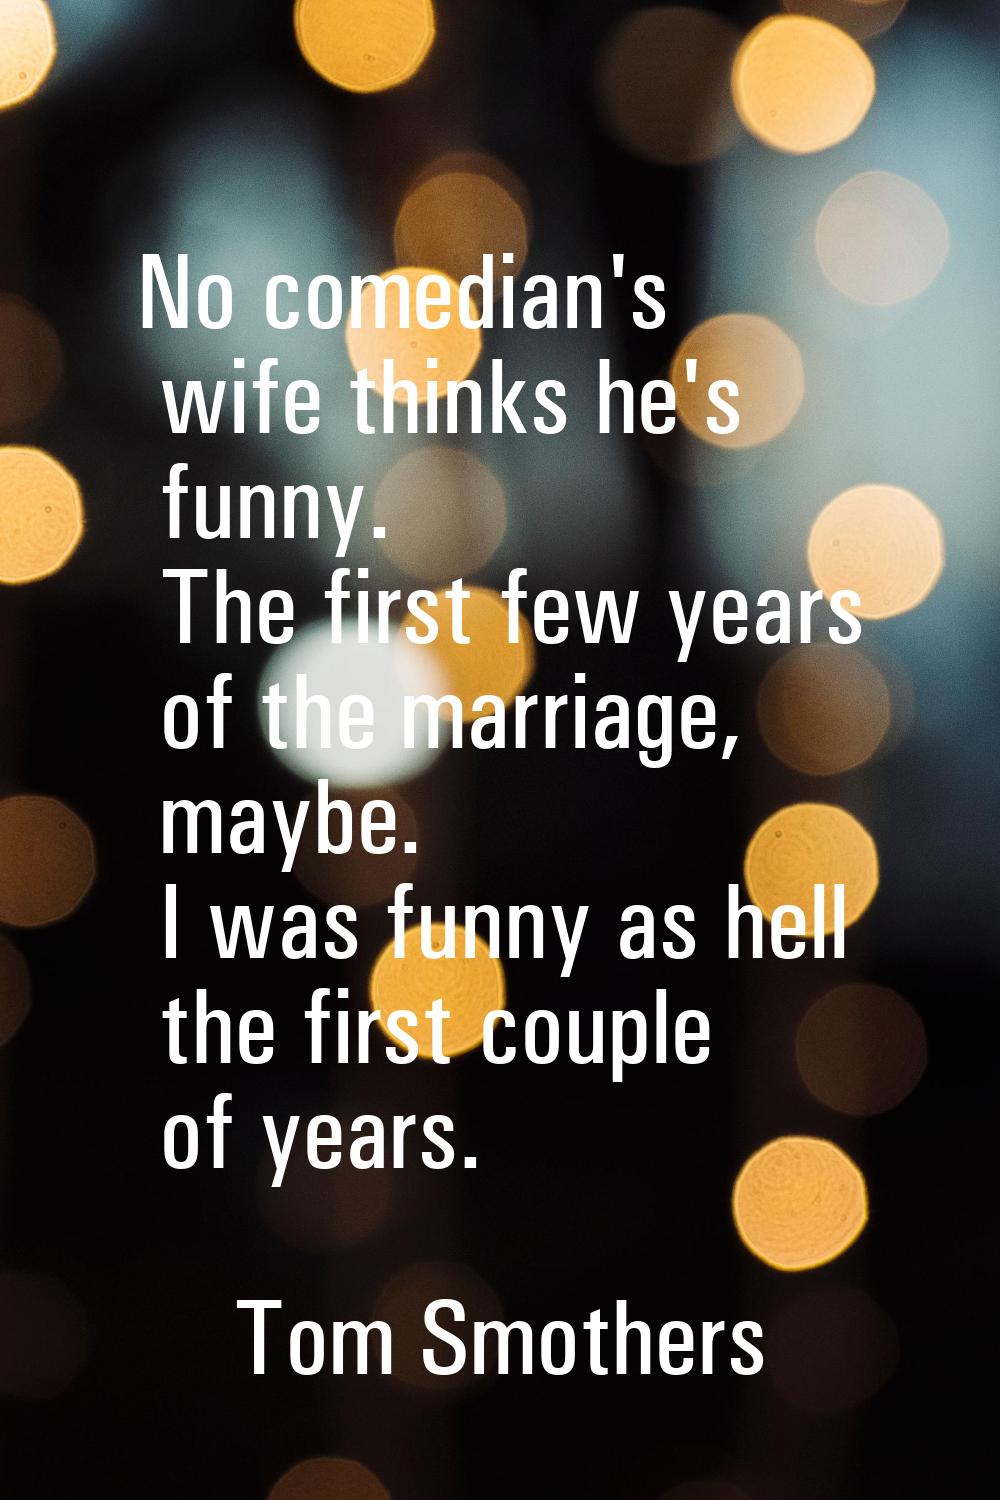 No comedian's wife thinks he's funny. The first few years of the marriage, maybe. I was funny as he